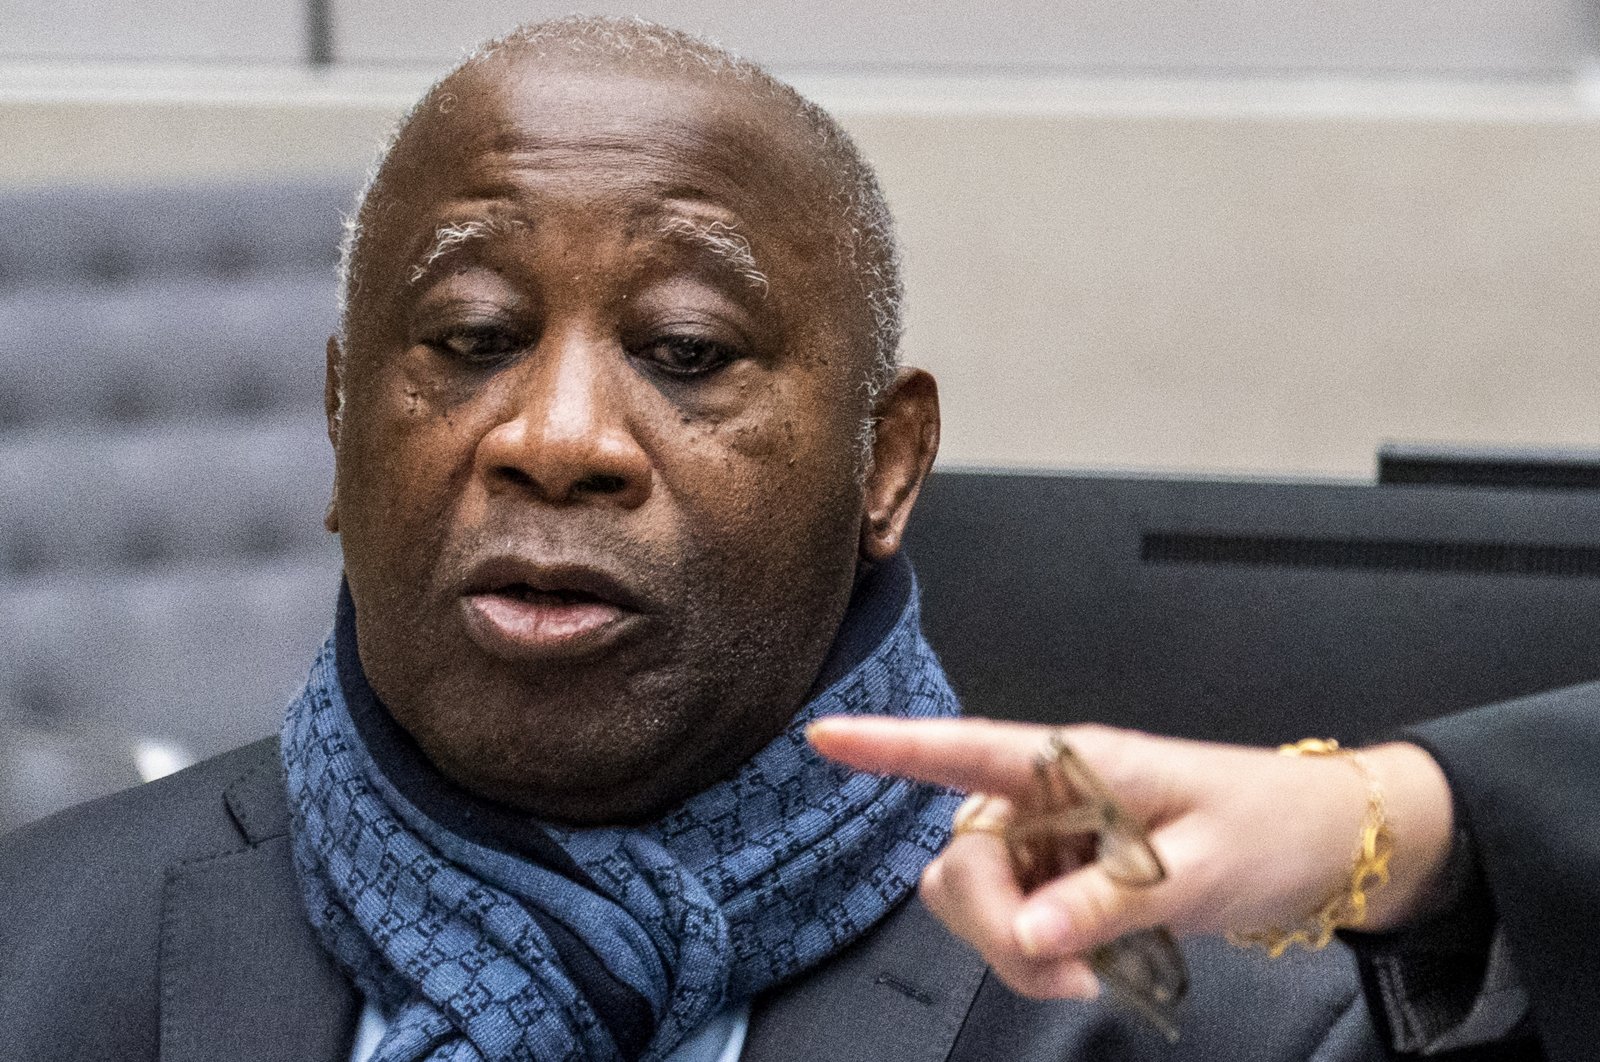 Former Ivory Coast president Laurent Gbagbo watches computer screens at the International Criminal Court in The Hague, Netherlands, Feb. 6, 2020. (AP Photo)